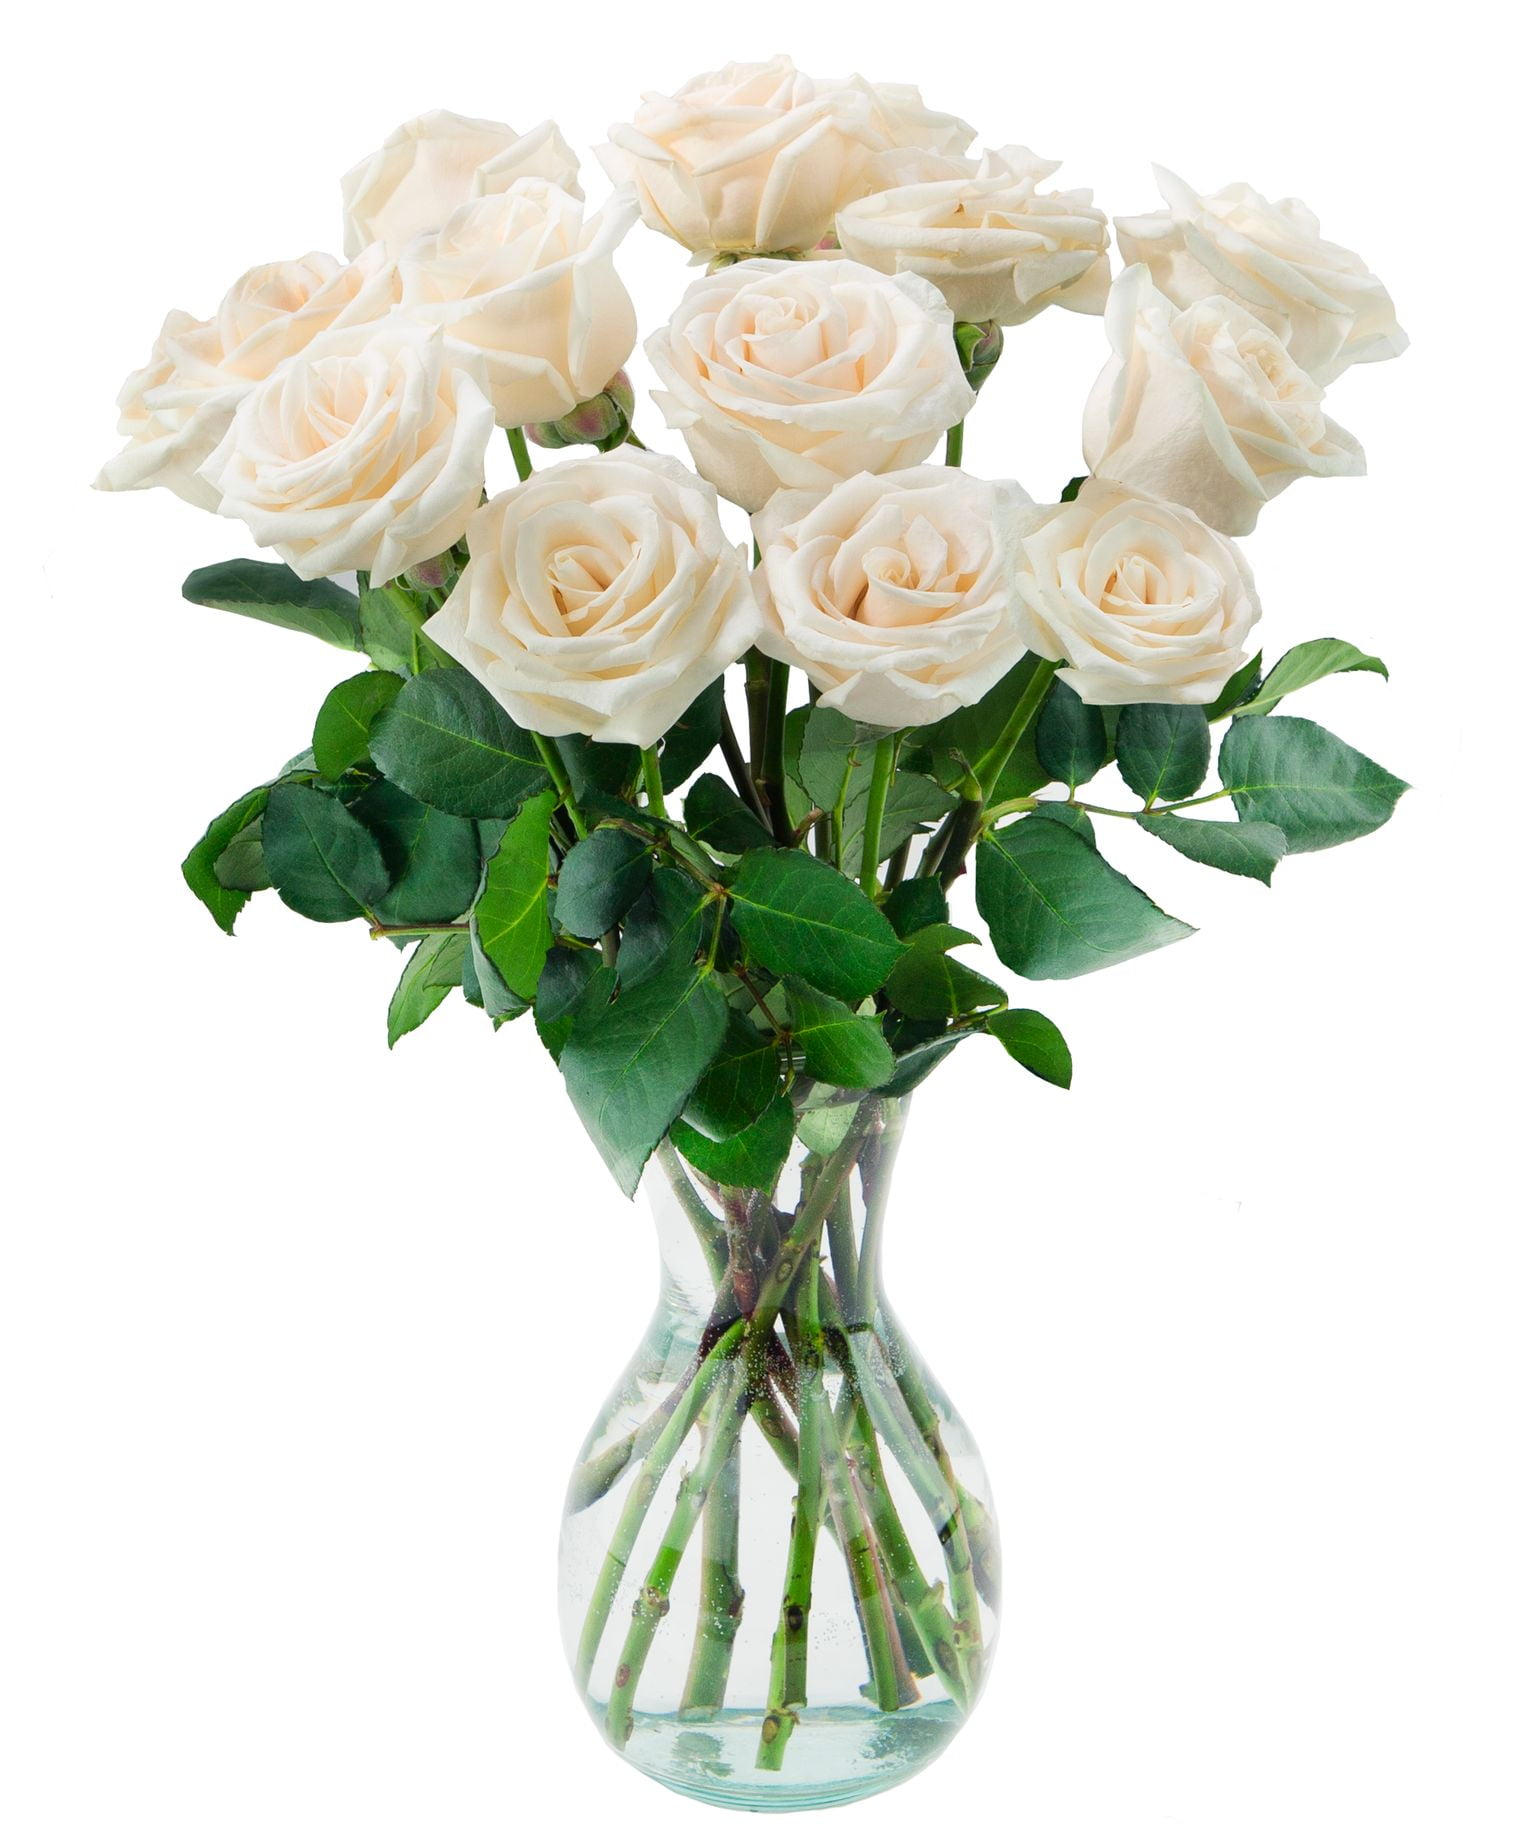 Arabella Bouquets Farm Direct Bouquet of 12 Fresh Cut White Roses with ...